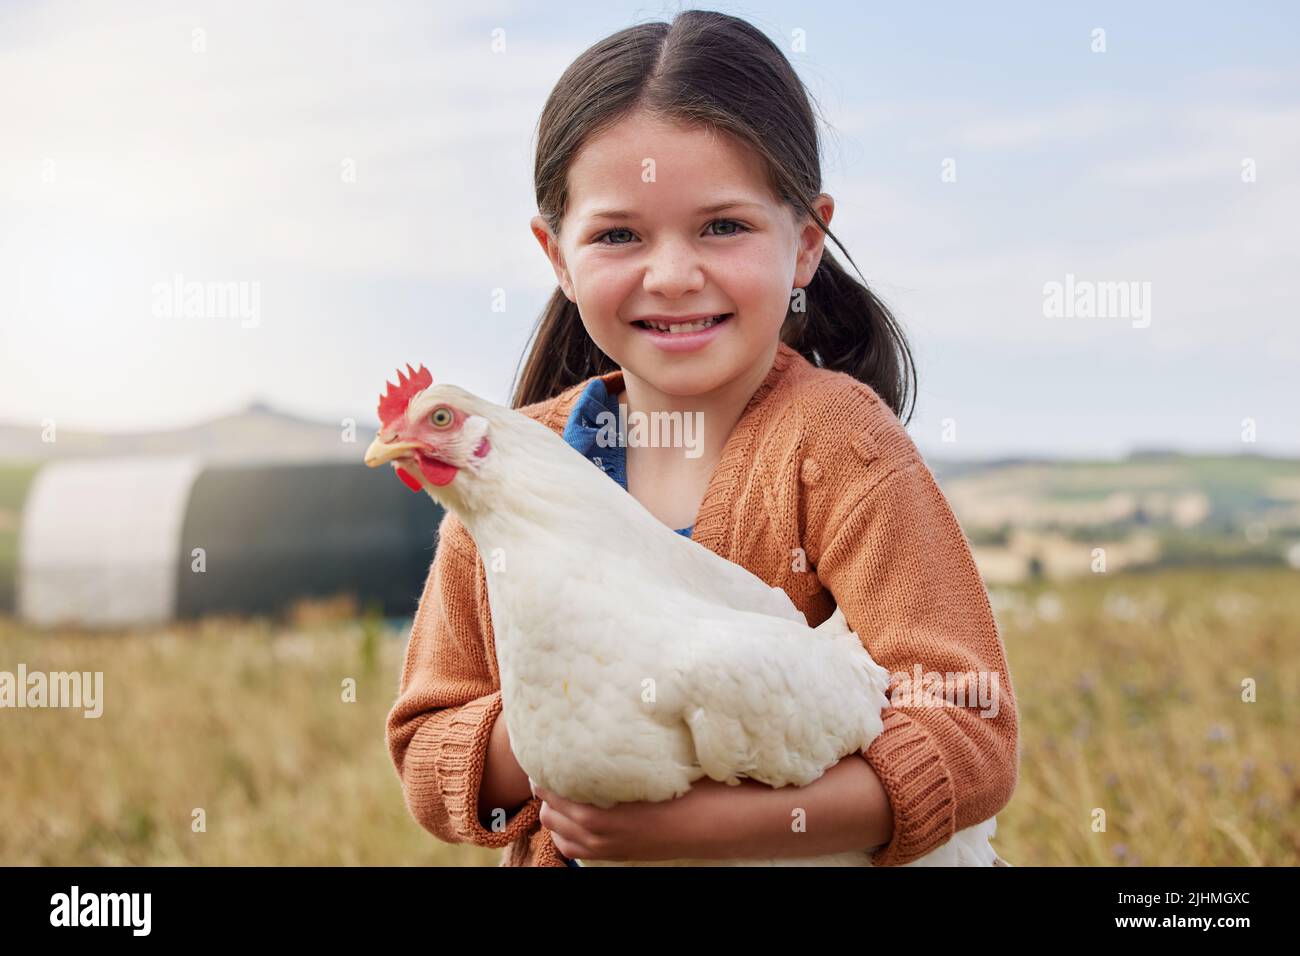 I help take care of the animals on our farm. an adorable little girl holding a chicken on a farm. Stock Photo